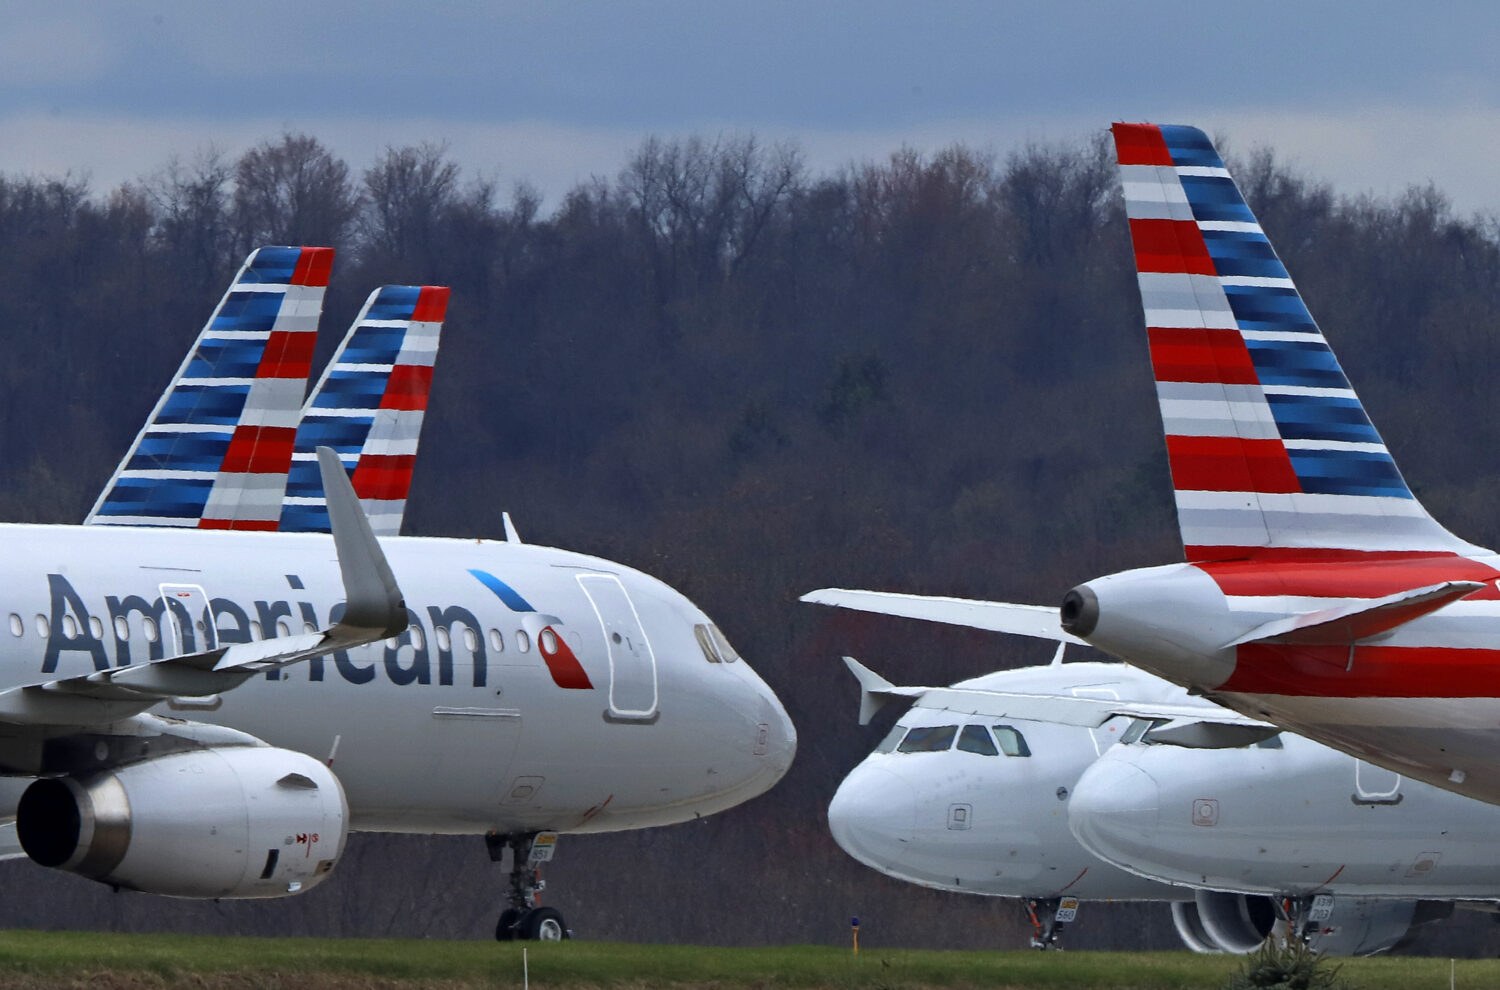 American Airlines pilots strike: What we know so far